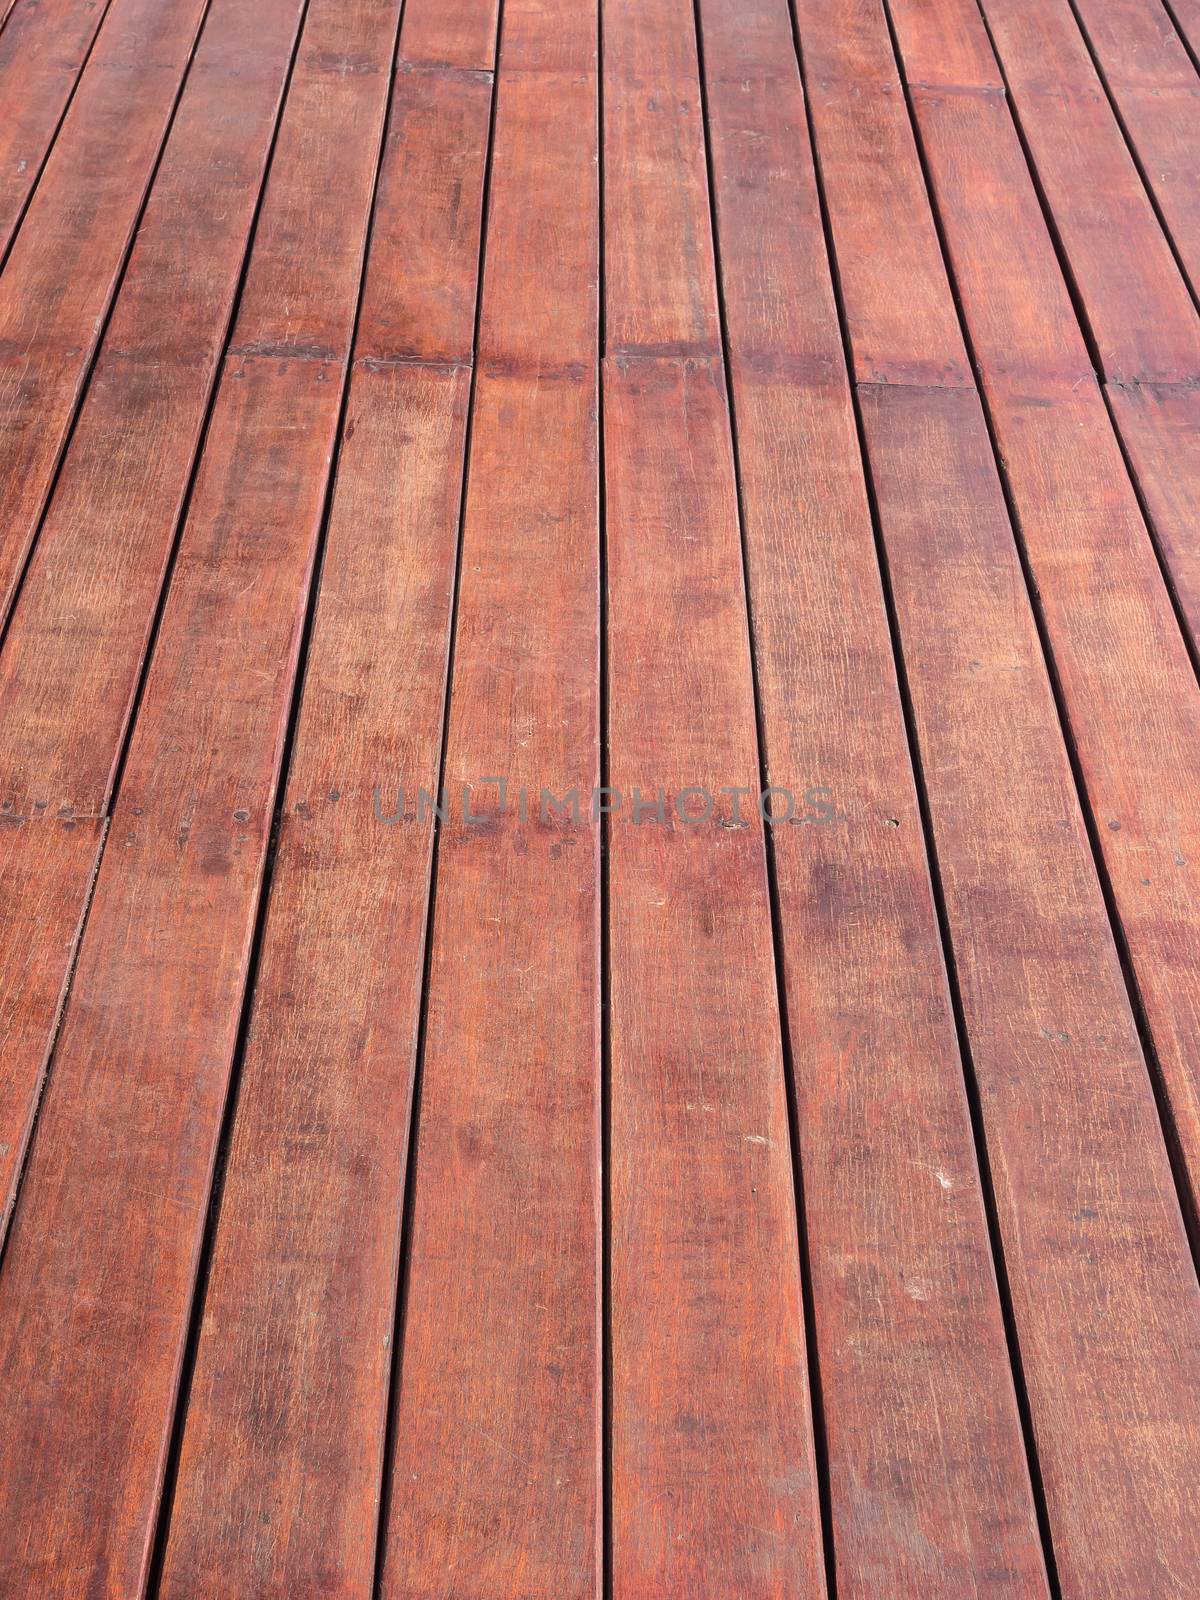 wooden floor of brown color , use for background